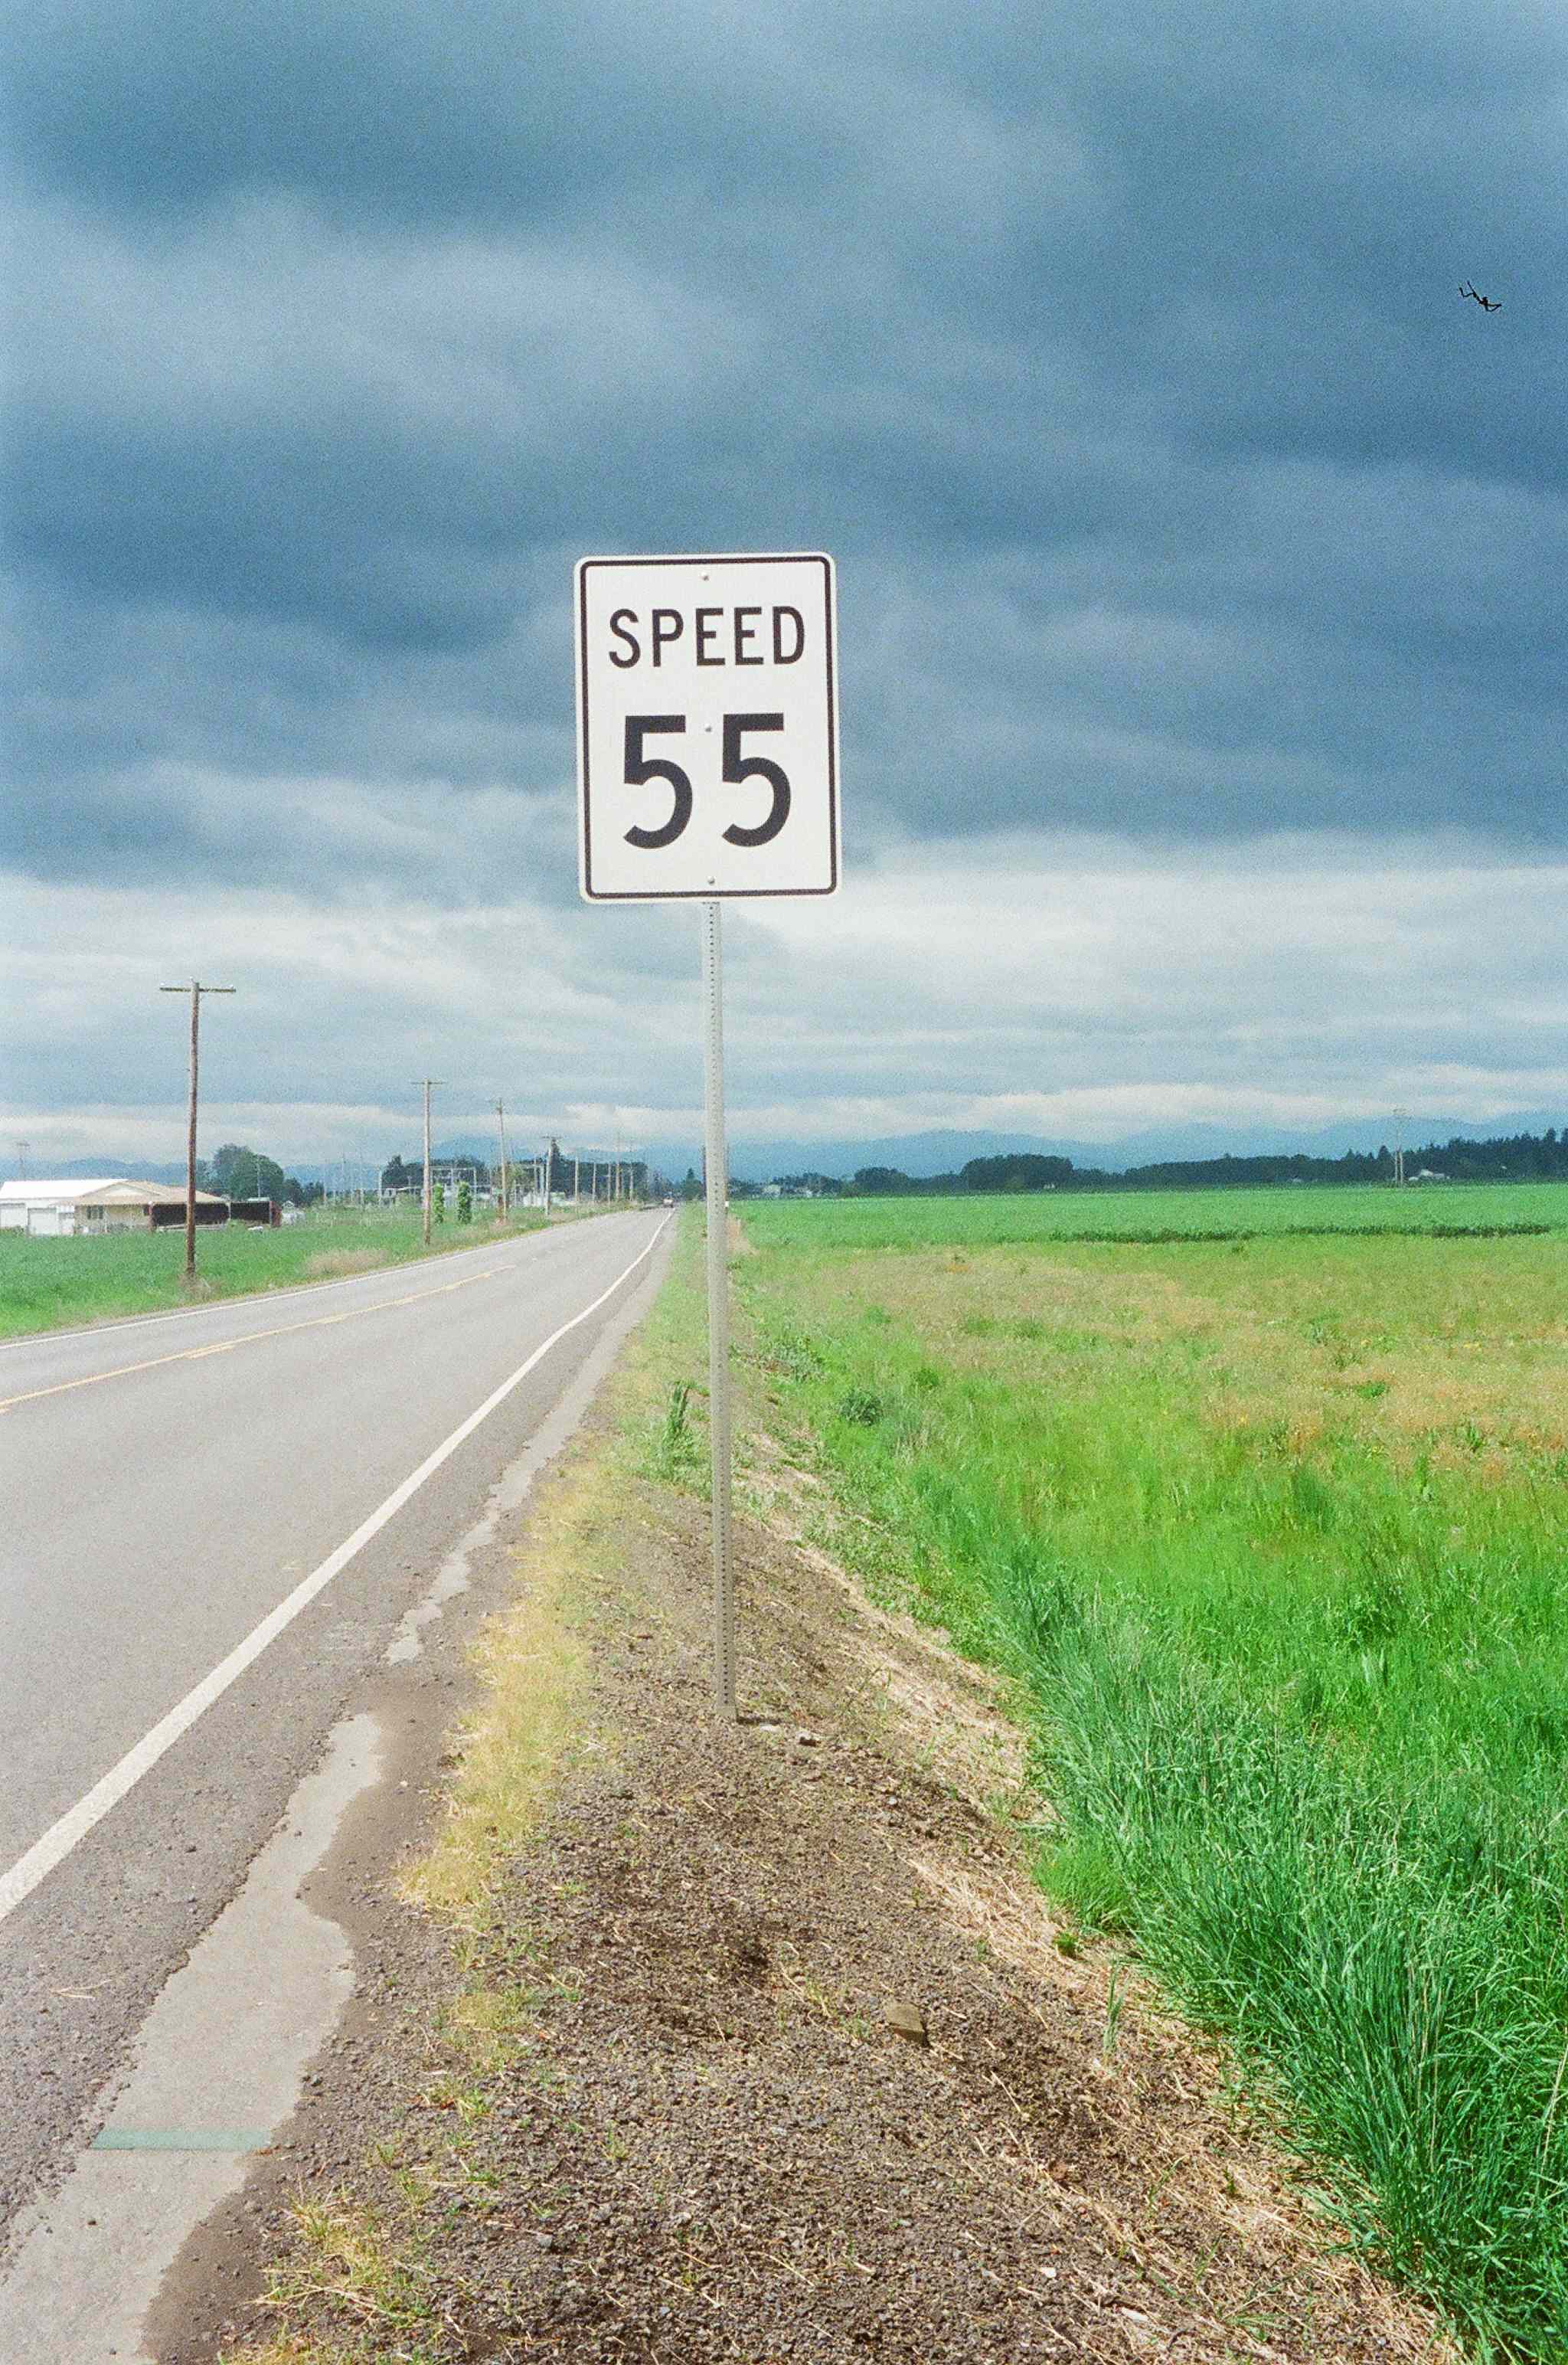  We limit our highway speeds to 55 mph in order to conserve fuel and reduce emissions. Generally, this creates a 15% fuel savings per mile, and a similar reduction in greenhouse gas emissions, when compared to a vehicle going 65 mph. &nbsp;EPA test r